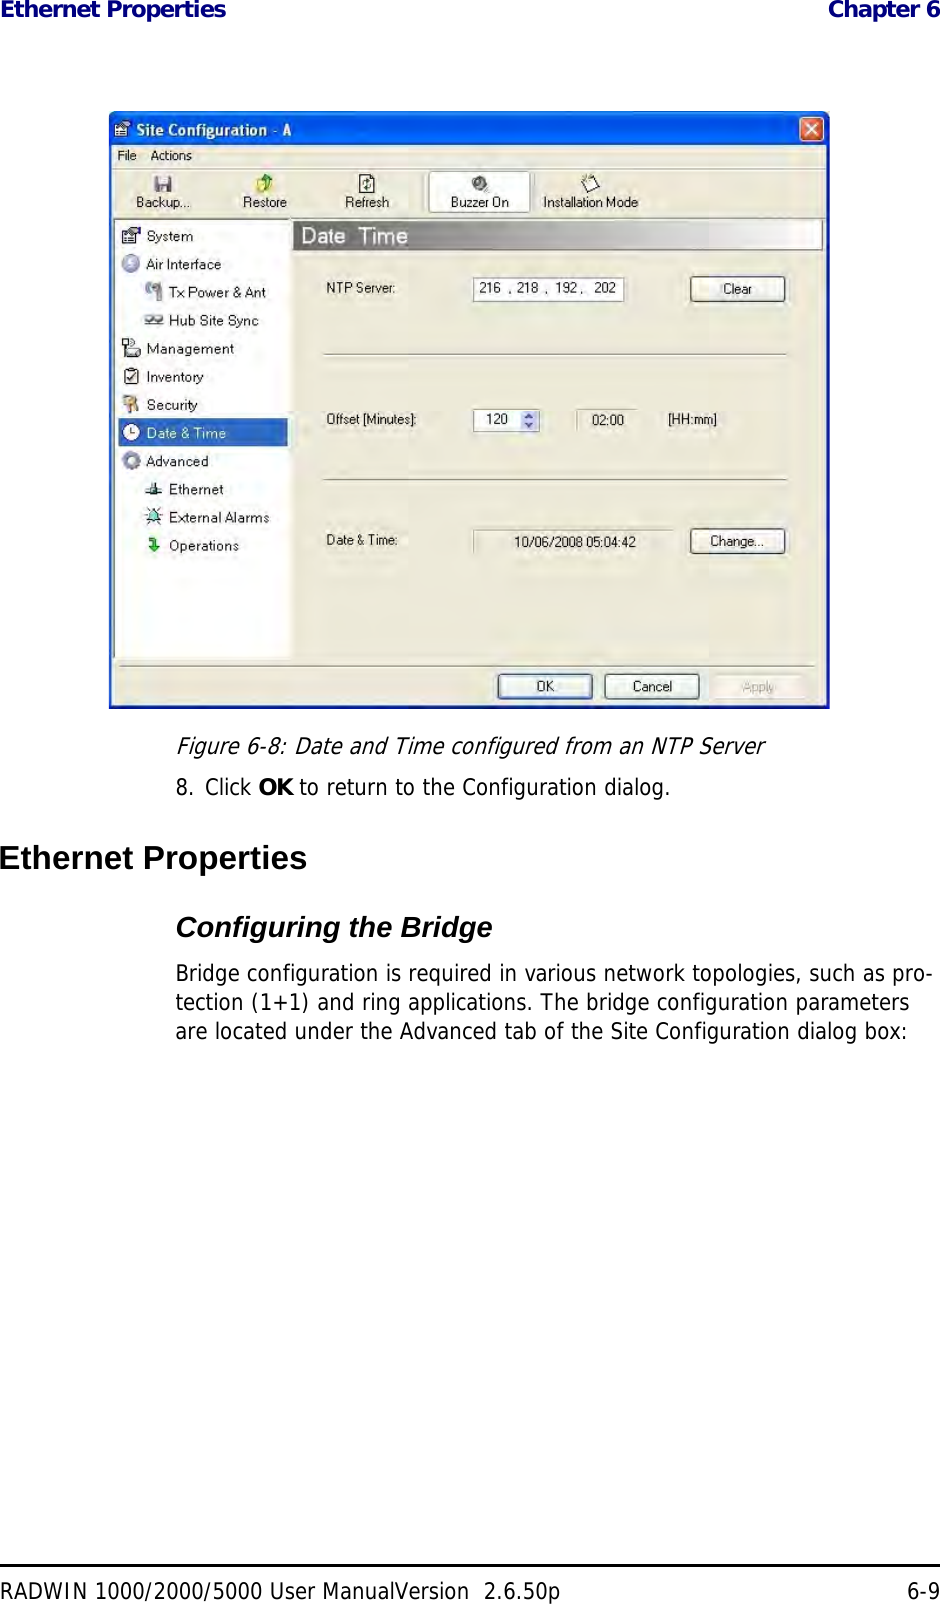 Ethernet Properties  Chapter 6RADWIN 1000/2000/5000 User ManualVersion  2.6.50p 6-9Figure 6-8: Date and Time configured from an NTP Server8. Click OK to return to the Configuration dialog.Ethernet PropertiesConfiguring the Bridge Bridge configuration is required in various network topologies, such as pro-tection (1+1) and ring applications. The bridge configuration parameters are located under the Advanced tab of the Site Configuration dialog box: